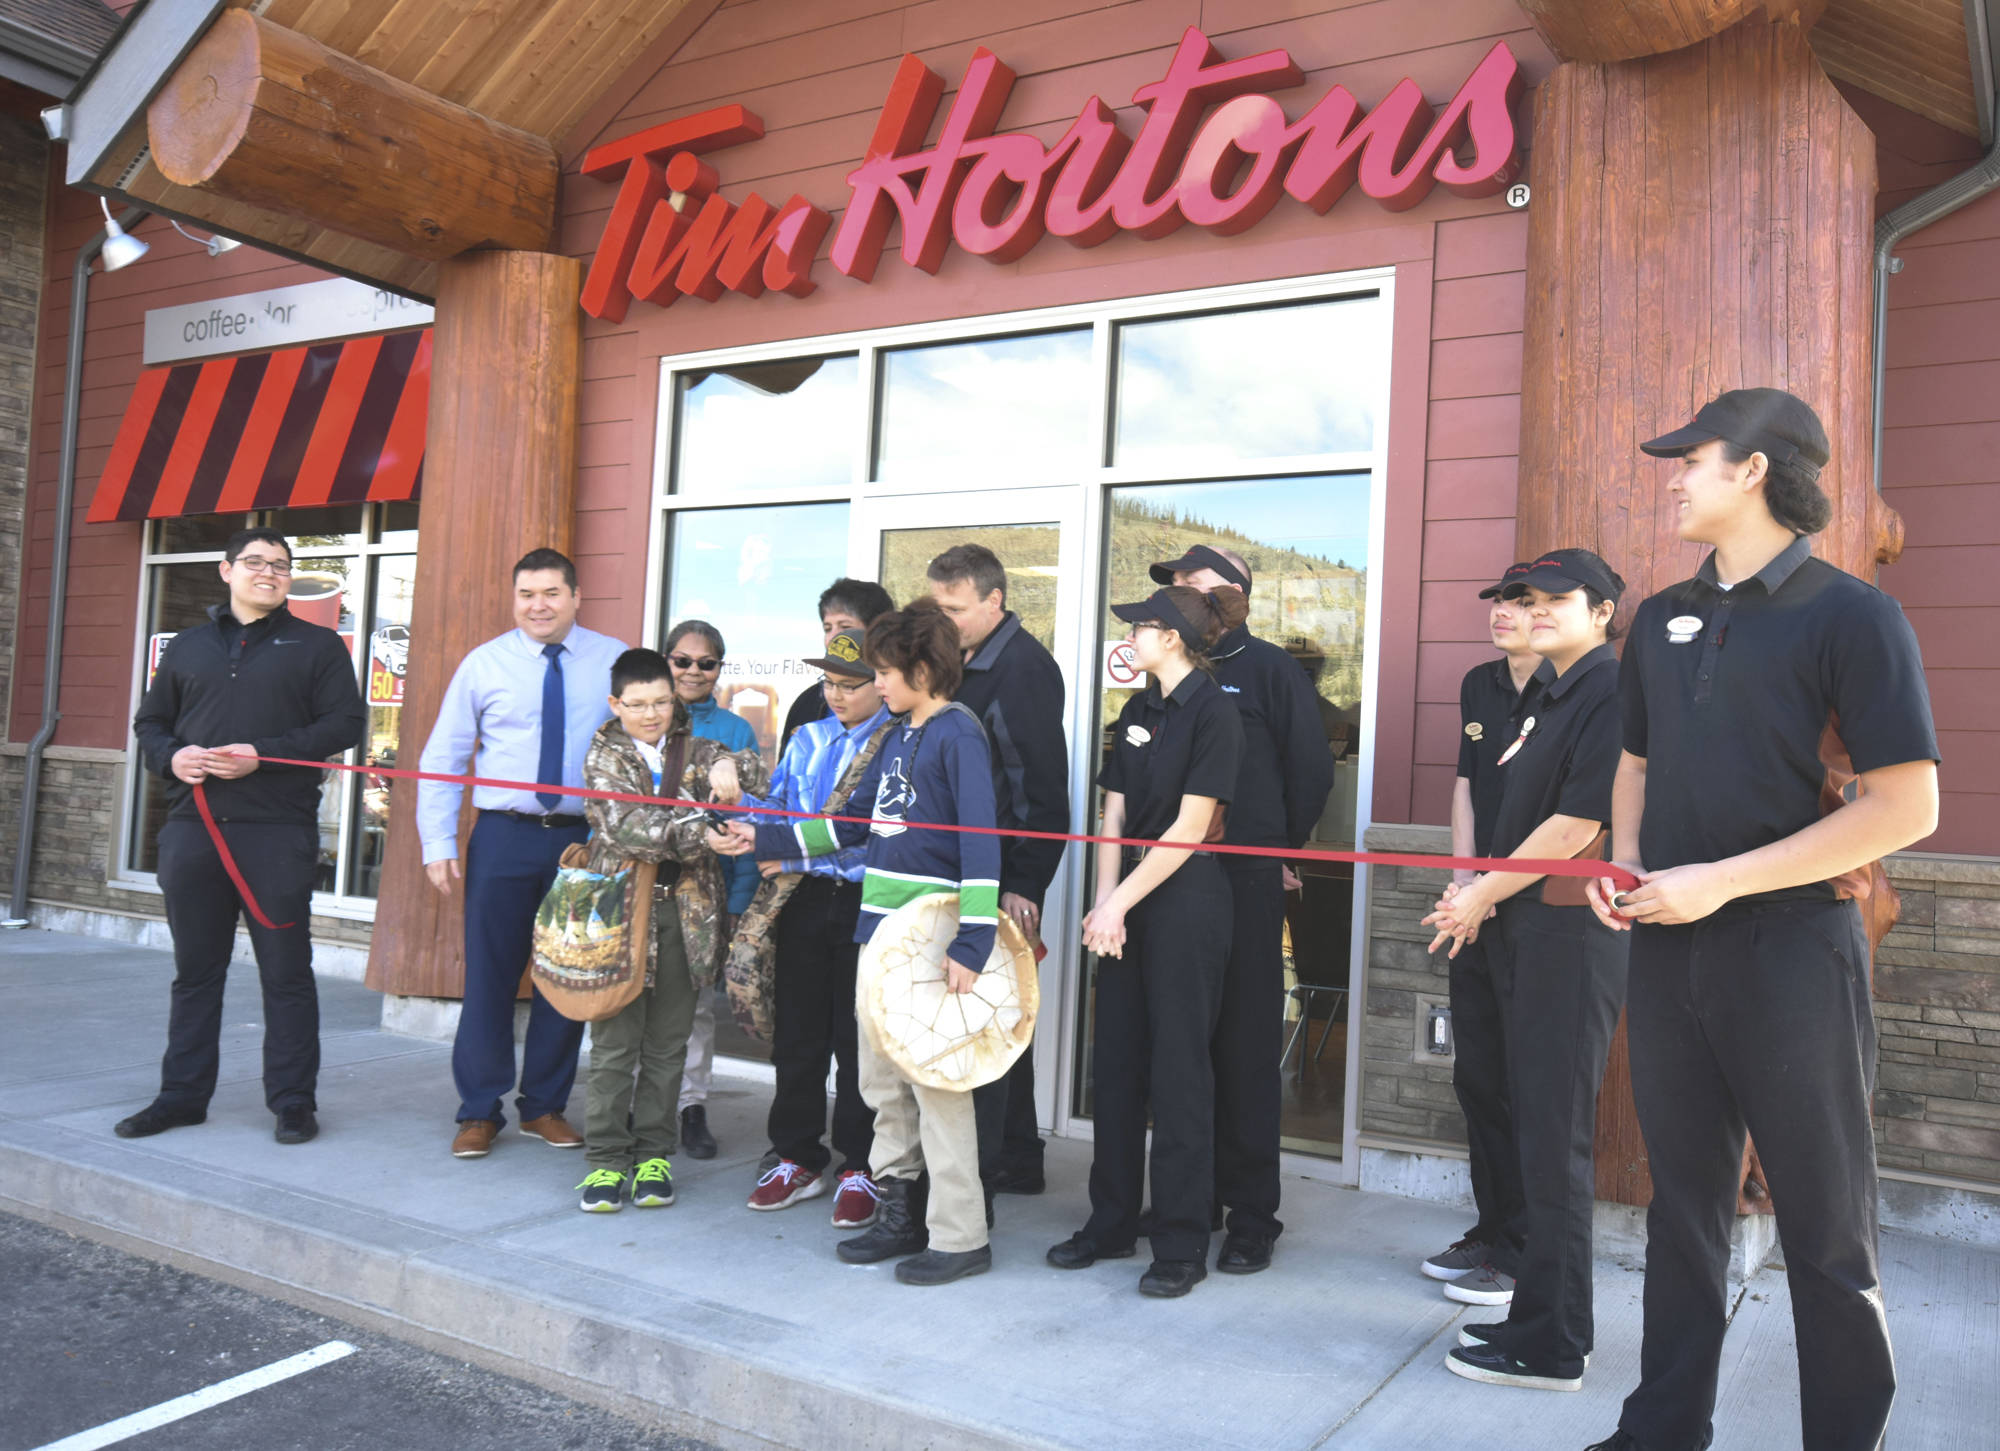 South Okanagan Tim Hortons owner stars in national ad campaign